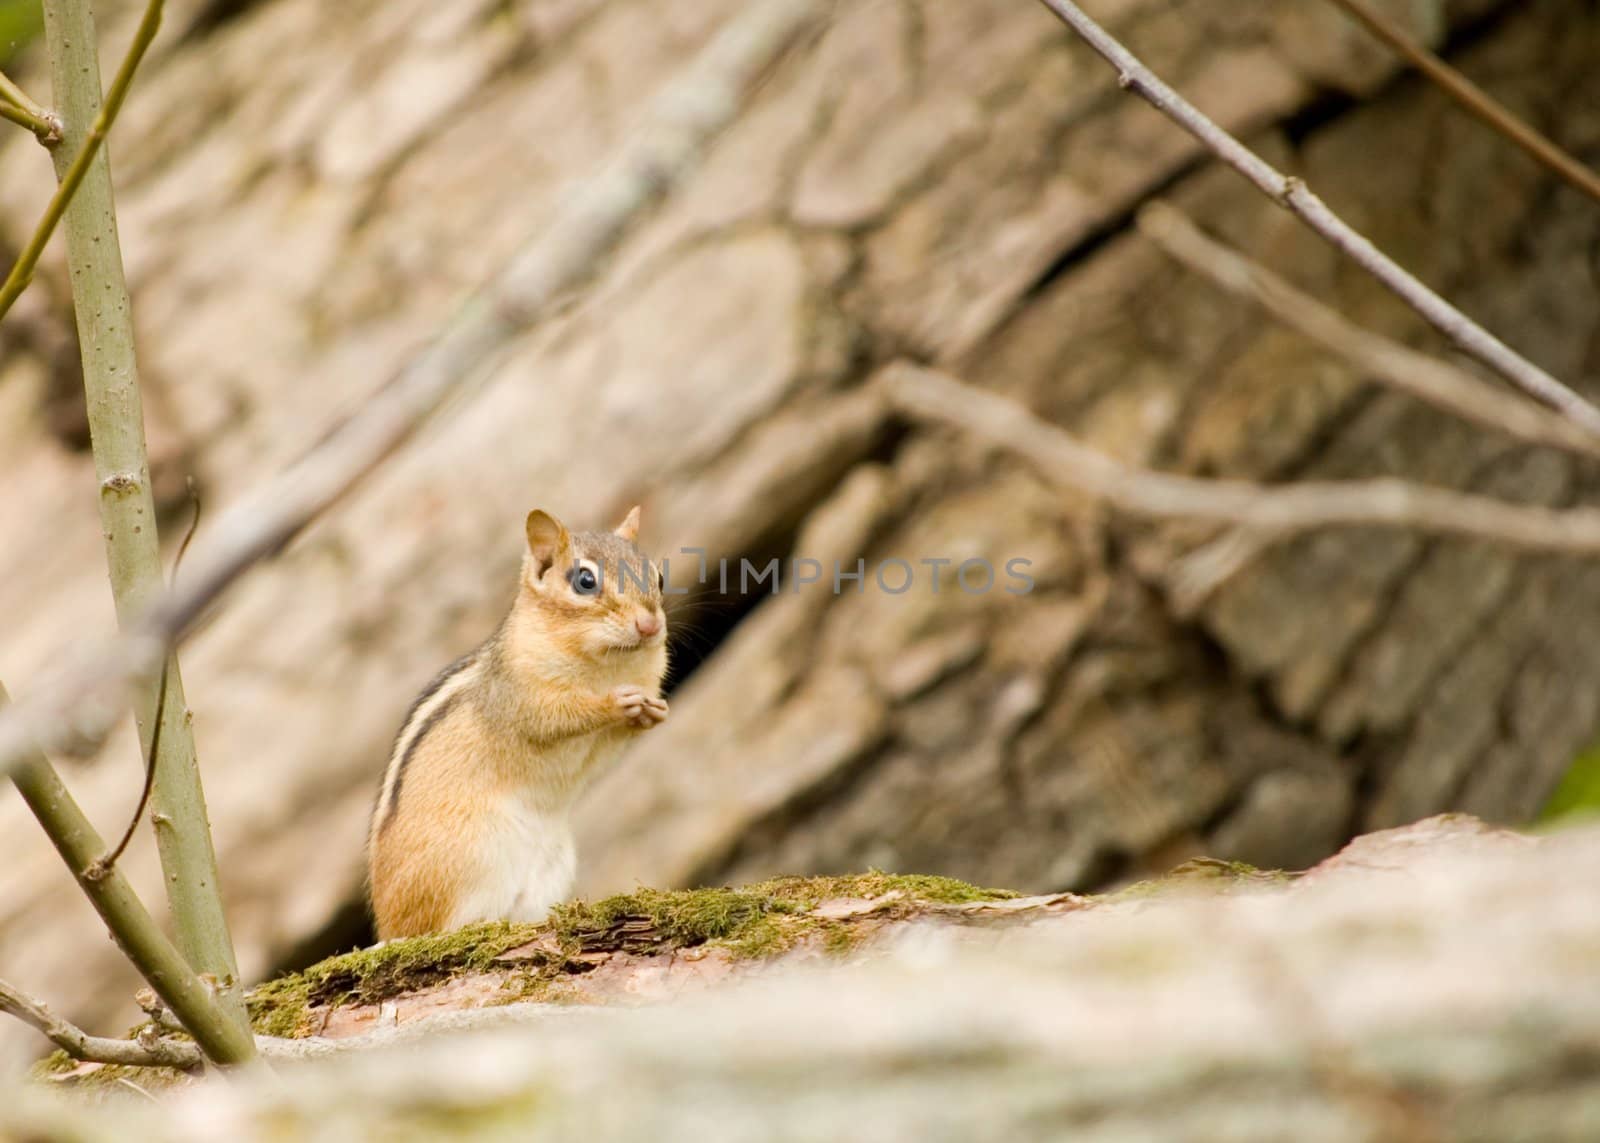 An eastern chipmunk perched on a tree trunk.